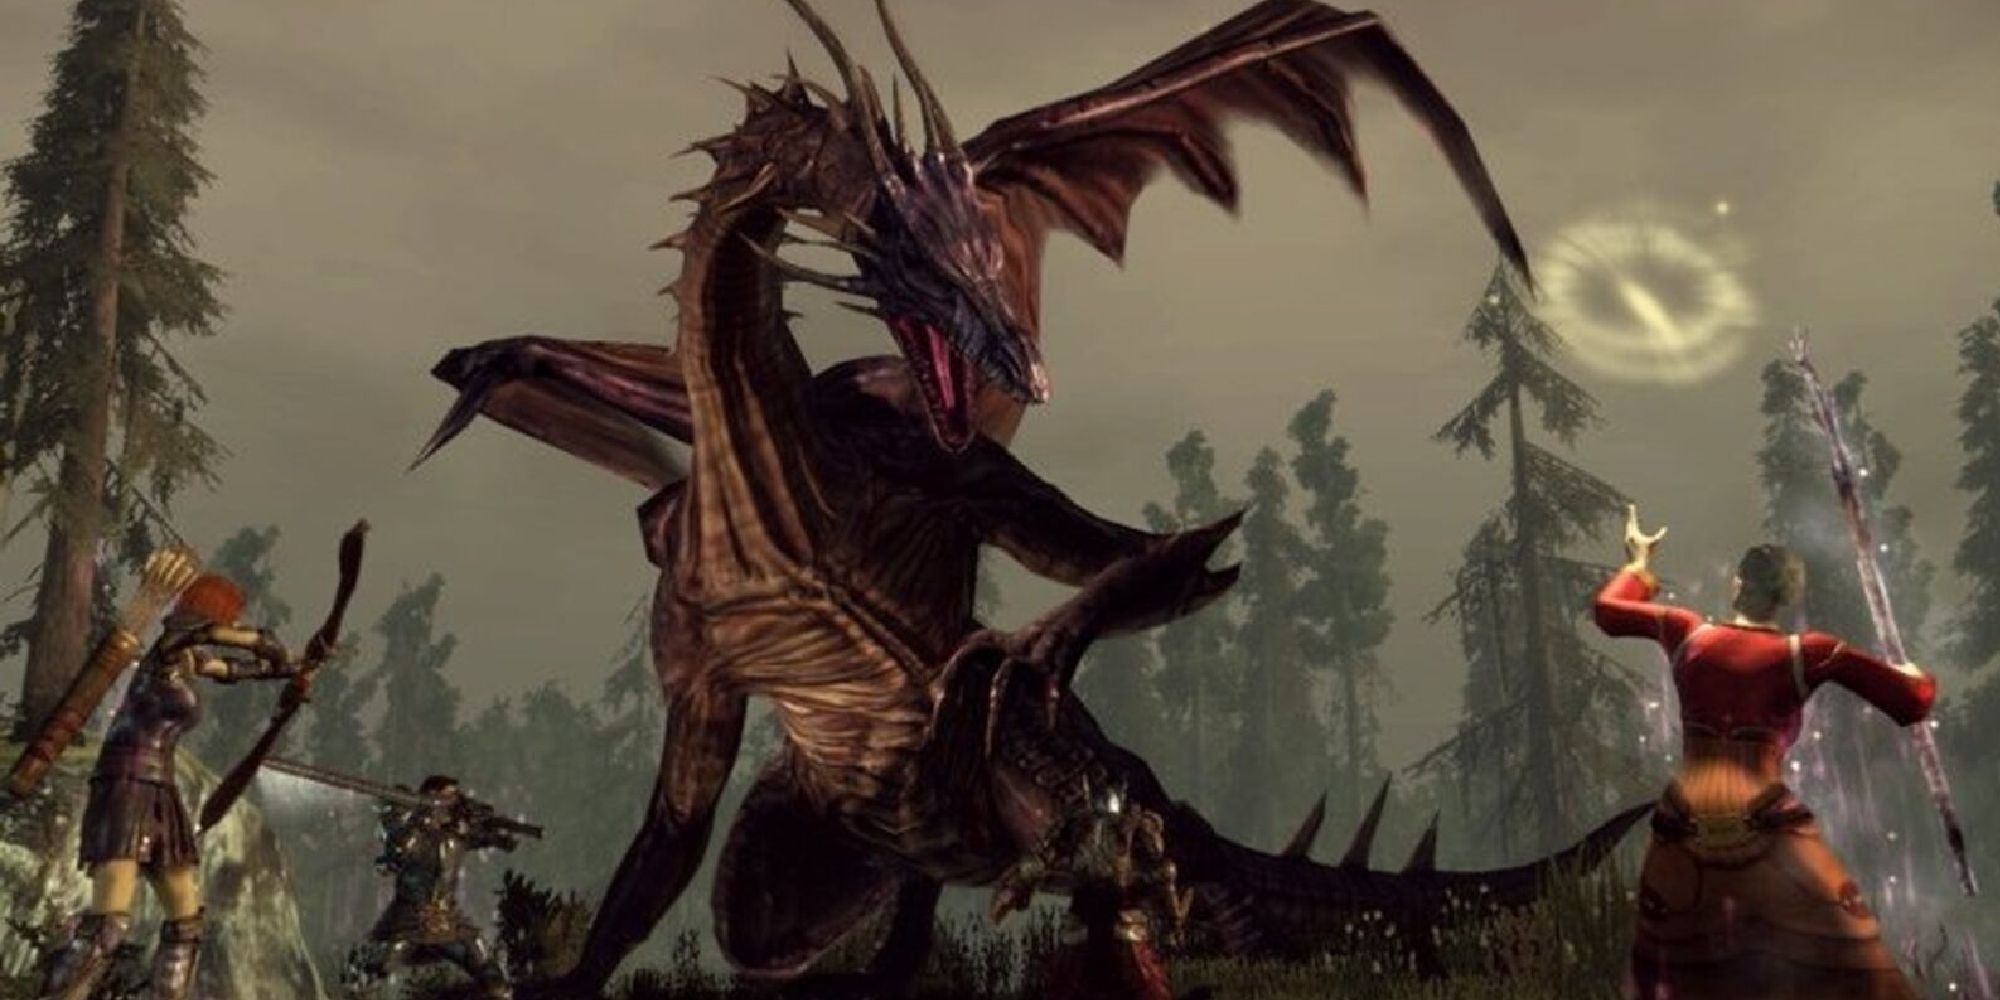 Three of the companions take part in a battle against a fearsome purple dragon, wielding spells, swords and arrows.